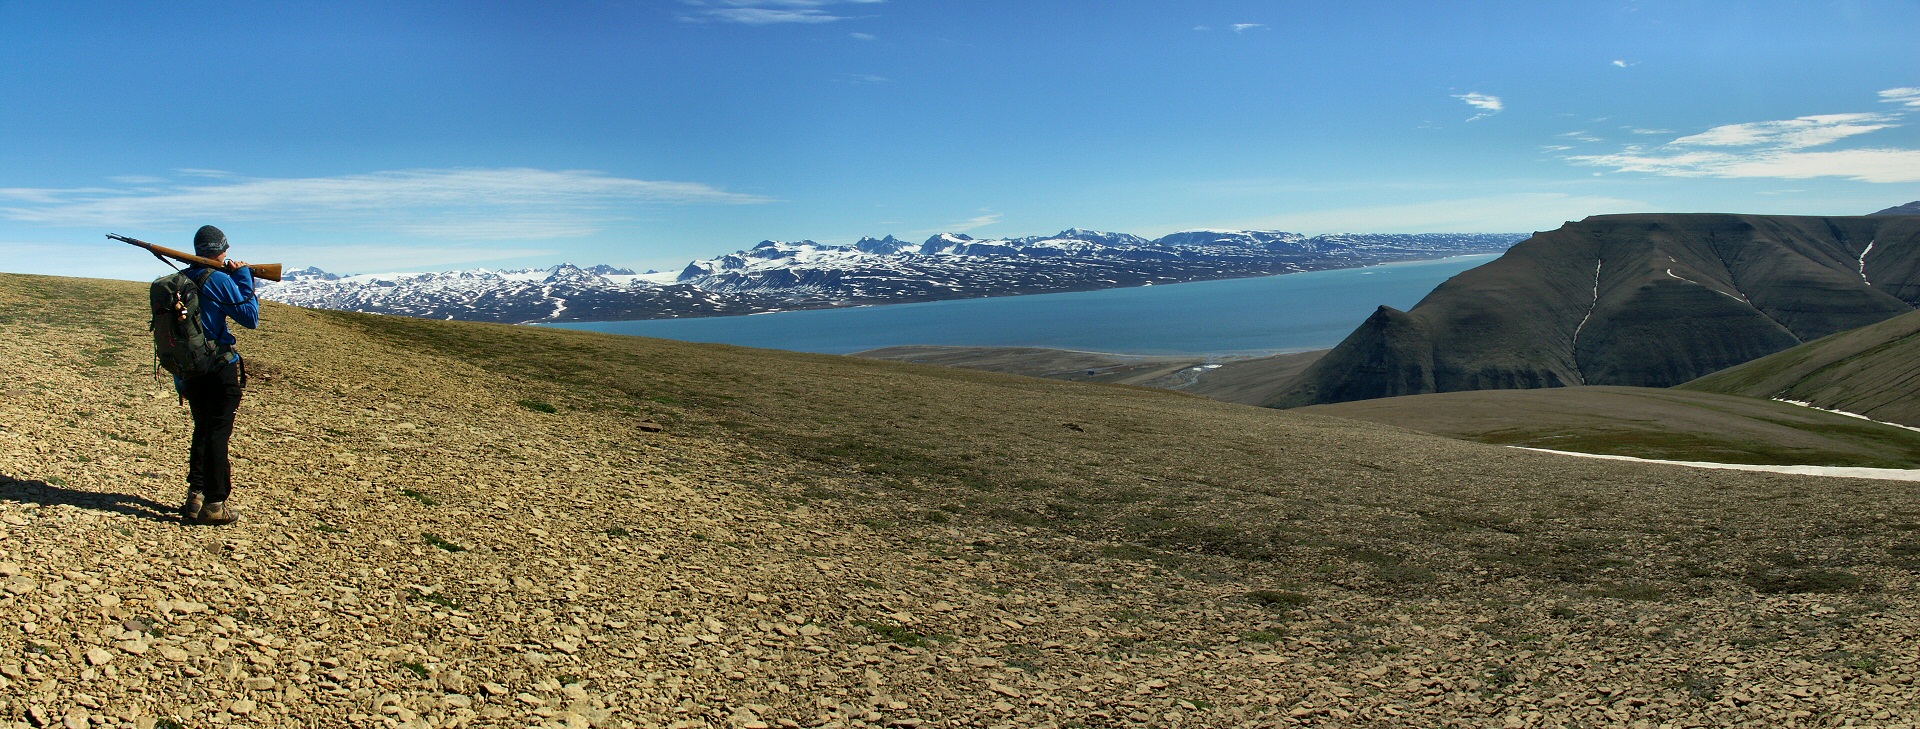 Cosntable Point surroundings, greenland